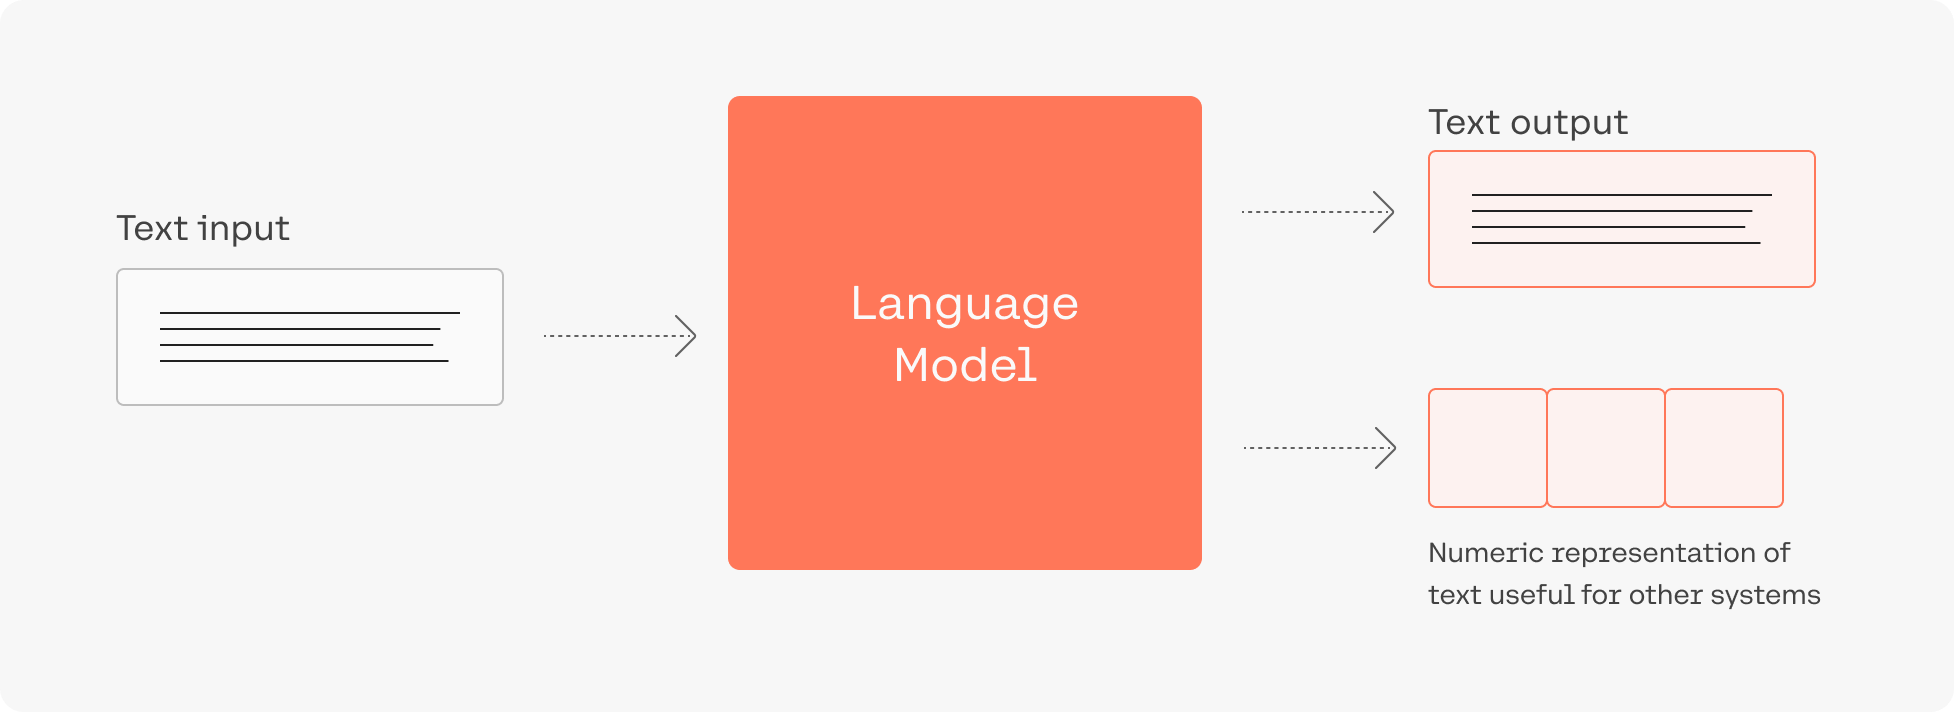 Large language models are computer programs that open new possibilities of text understanding and generation in software systems.